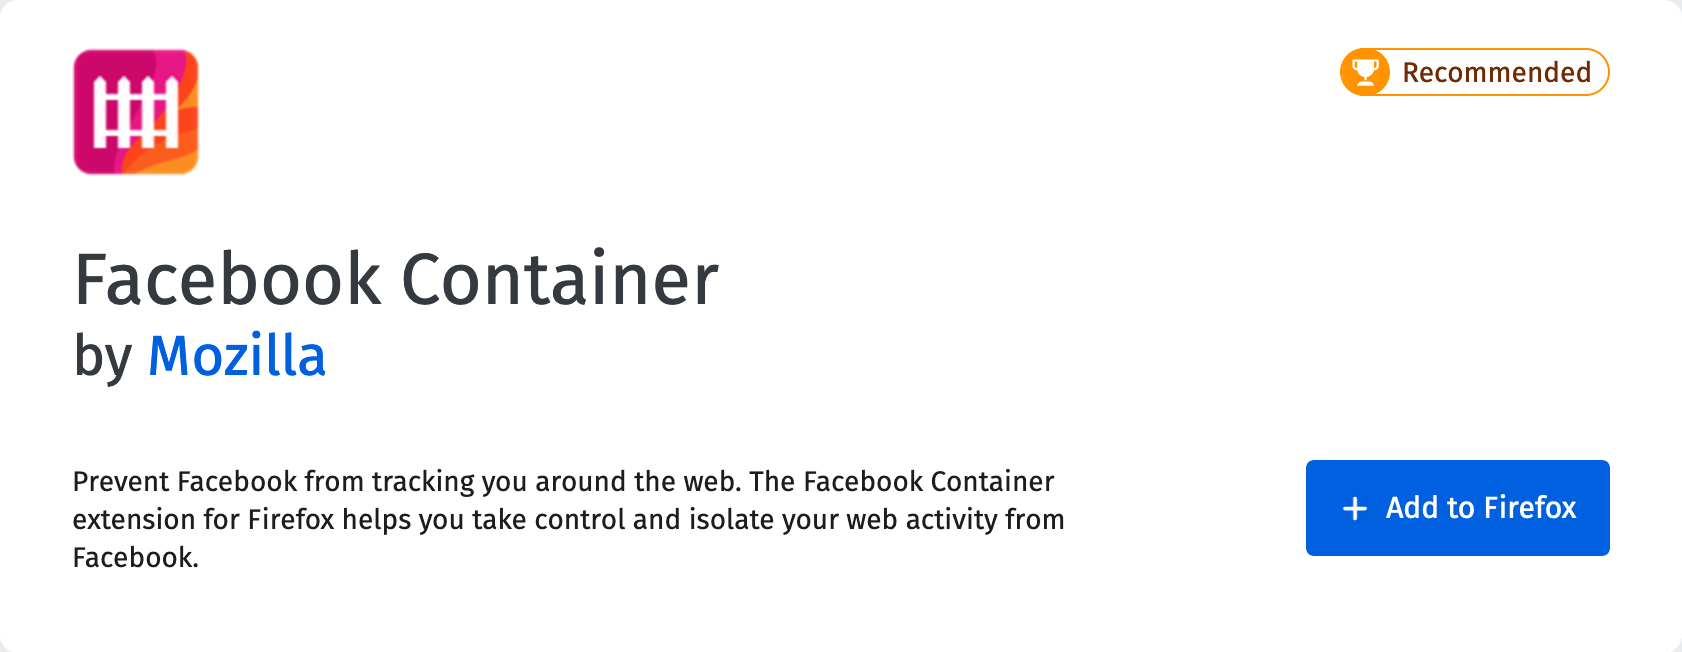 Mozilla Facebook Container extension for Firefox image5.png